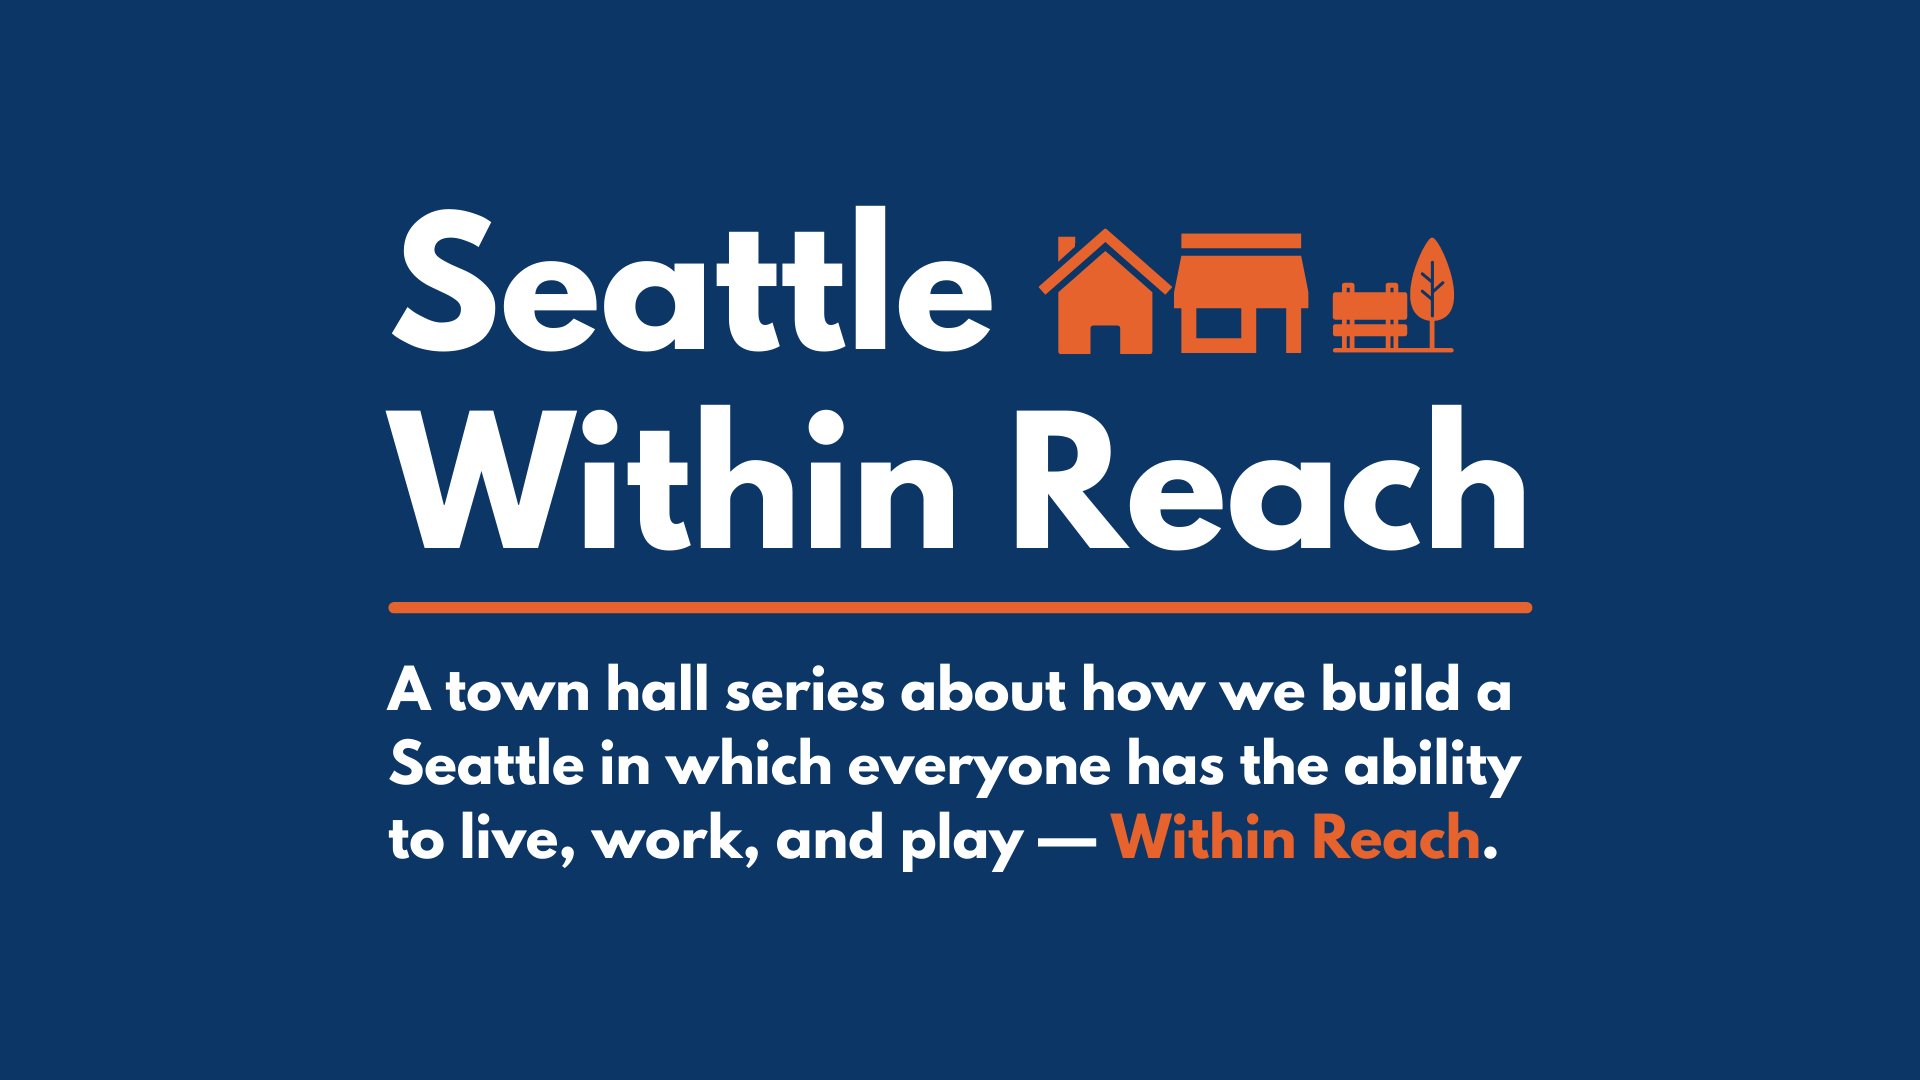 Seattle Within Reach